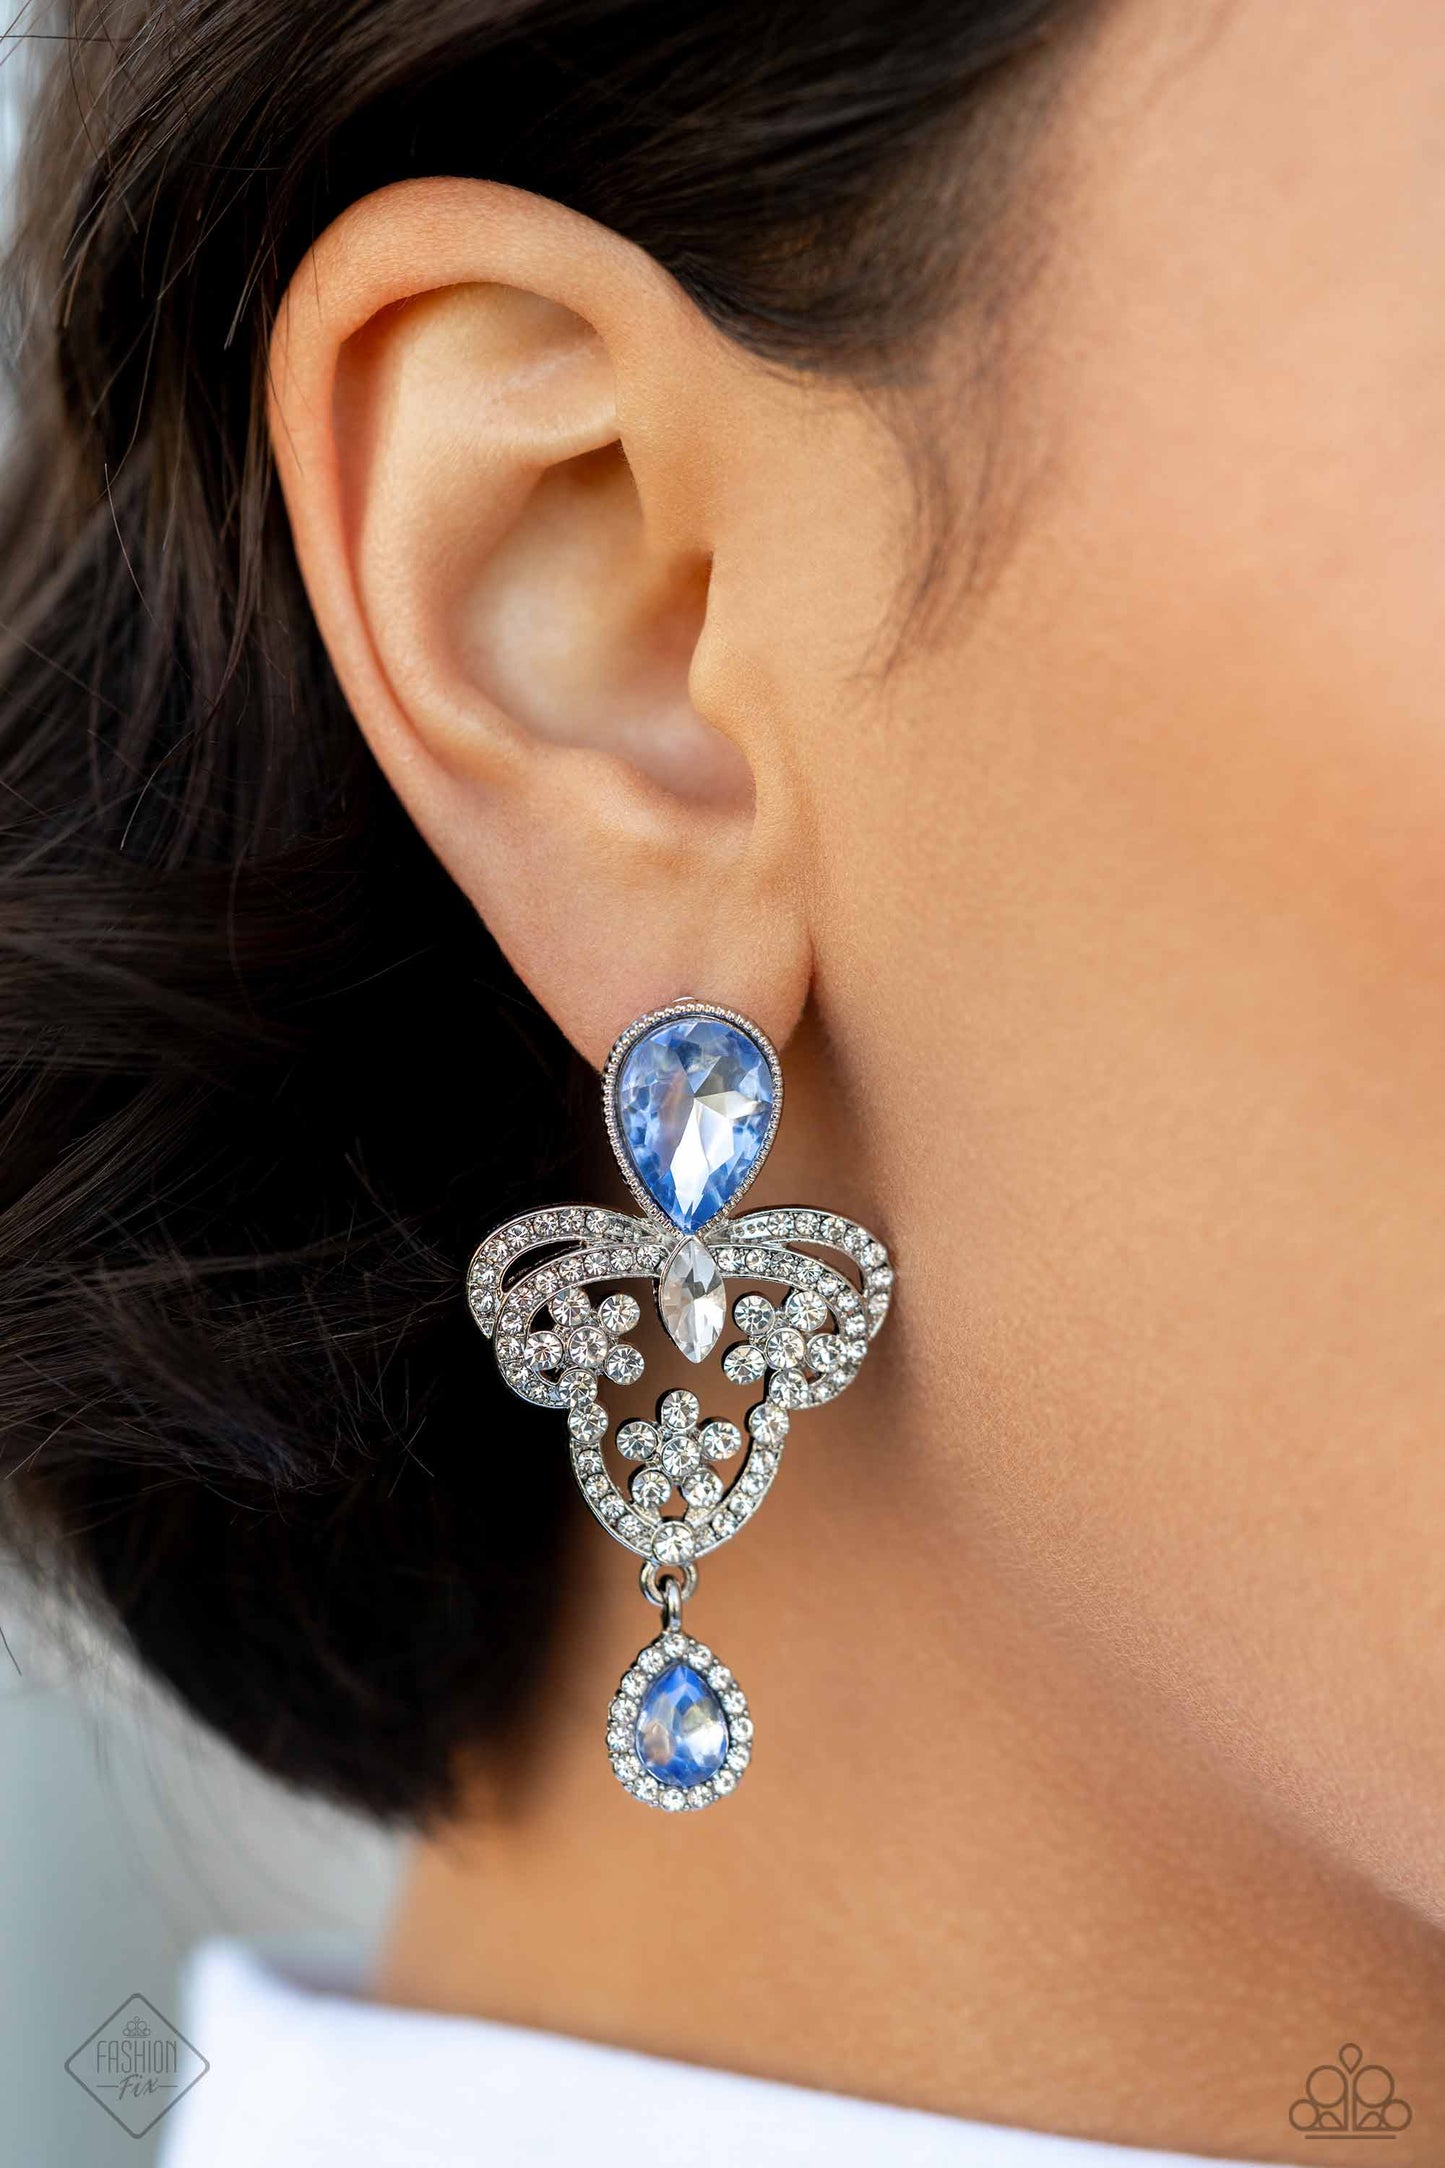 Giving Glam - Blue and Silver Earrings - Paparazzi Accessories - Pressed in a silver textured frame, an upside-down blue teardrop gem gives way to a silver, decorative, chandelier-like frame. The decorative frame swirls with dainty white rhinestones and white marquise-cut gems for a timelessly over-the-top sparkle. Bordered by glassy white rhinestones, an upright, smaller blue teardrop gem creates a dainty fringe at the bottom of the frame for an additional pop of elegant color.